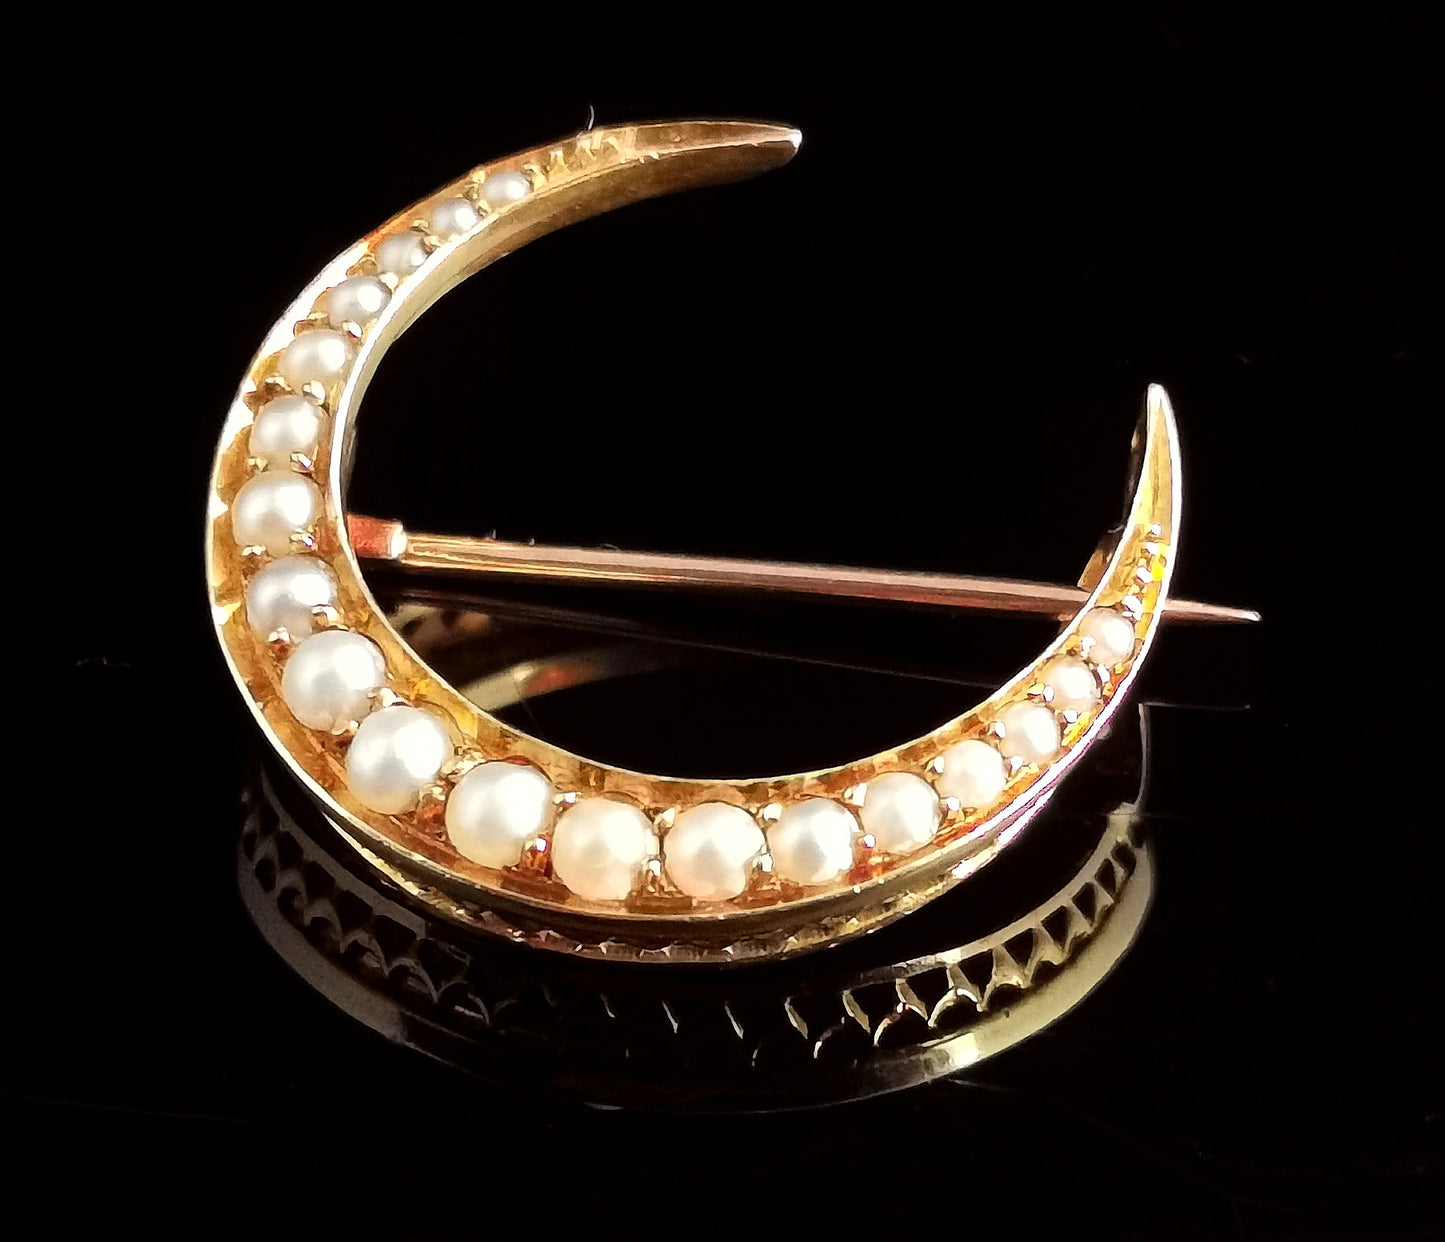 Antique Victorian 15ct gold and Pearl Crescent Moon brooch, pin